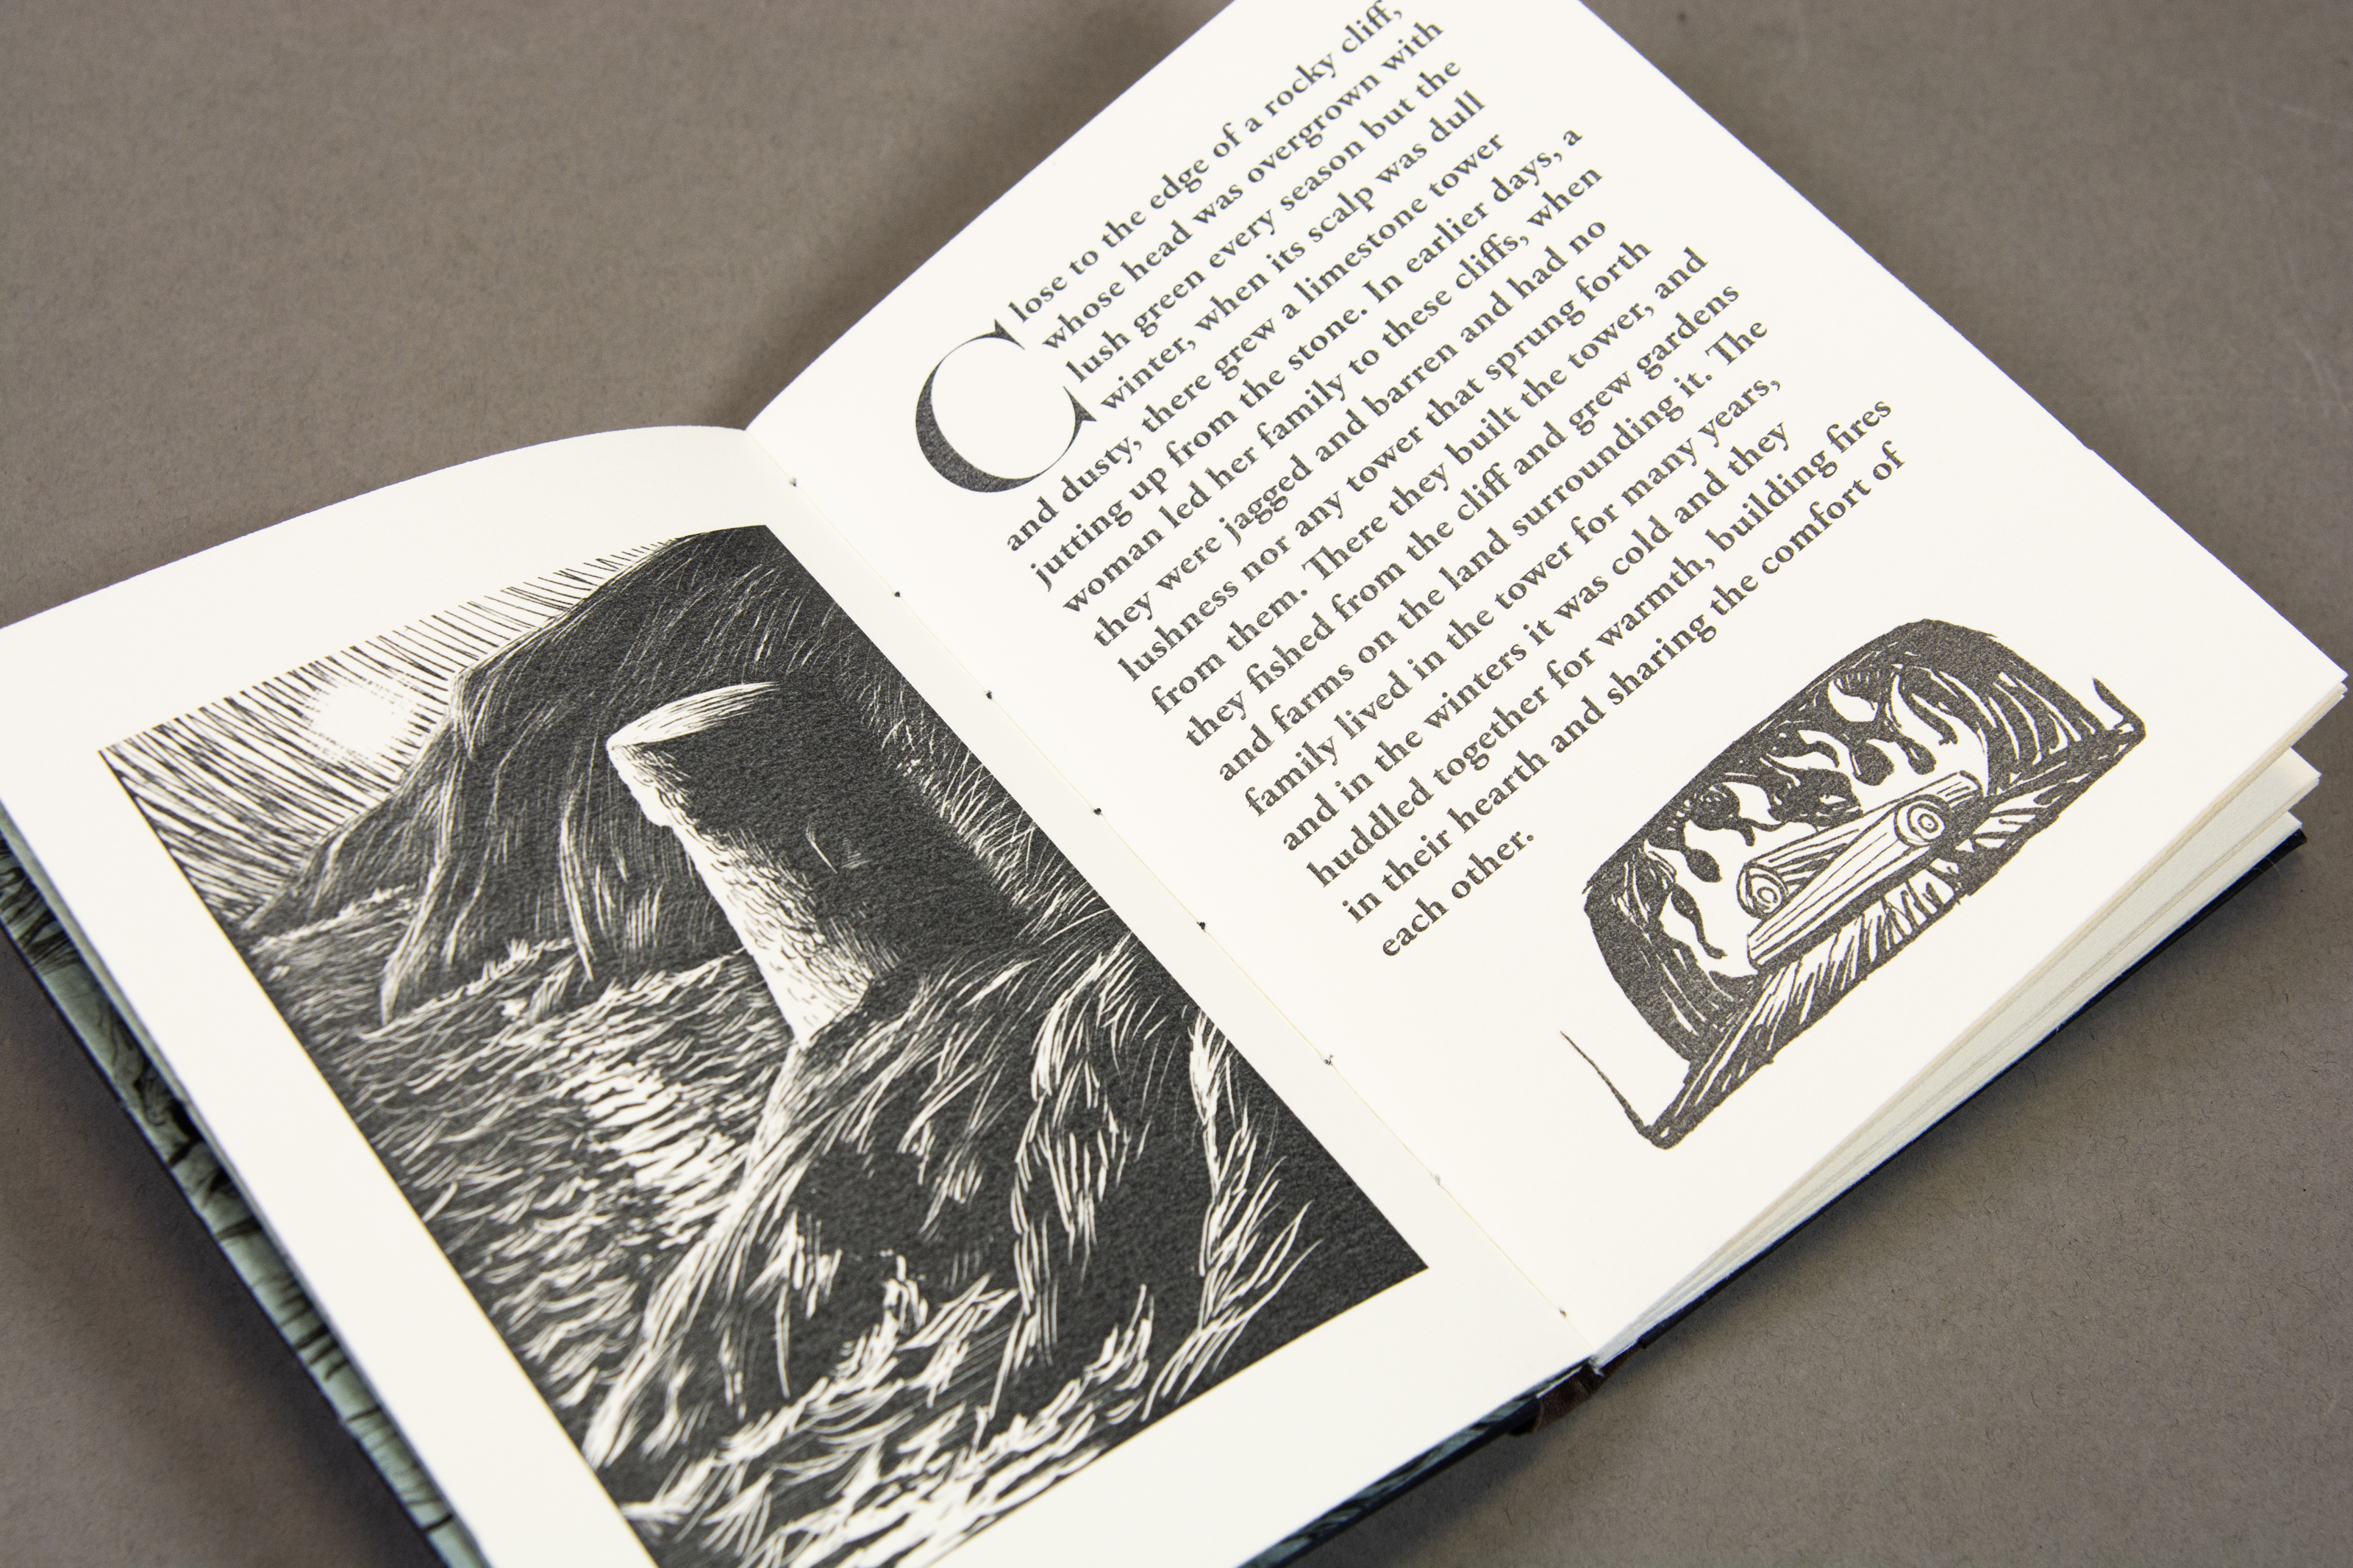 An open book with a black and white illustration of a landscape scene on the left page and text on the right page